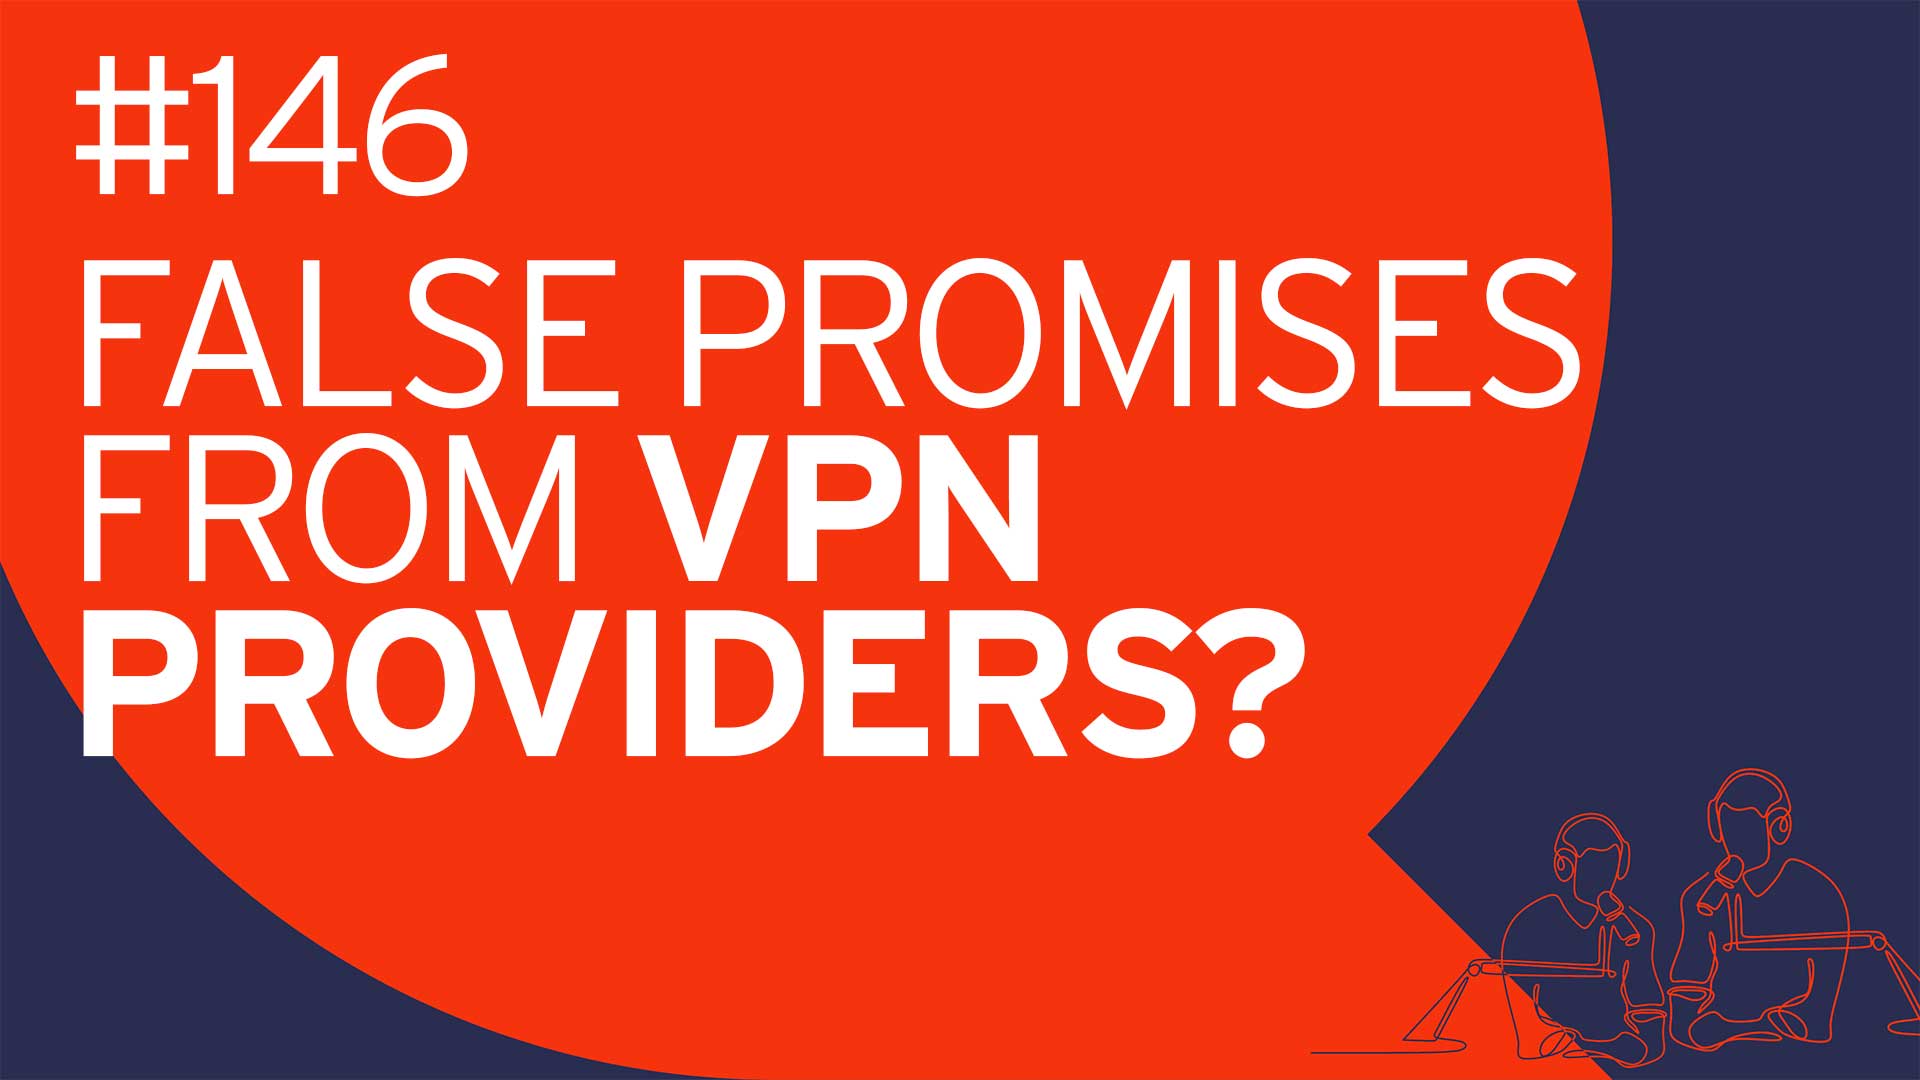 Analyst Chat #146: Do You Still Need a VPN?